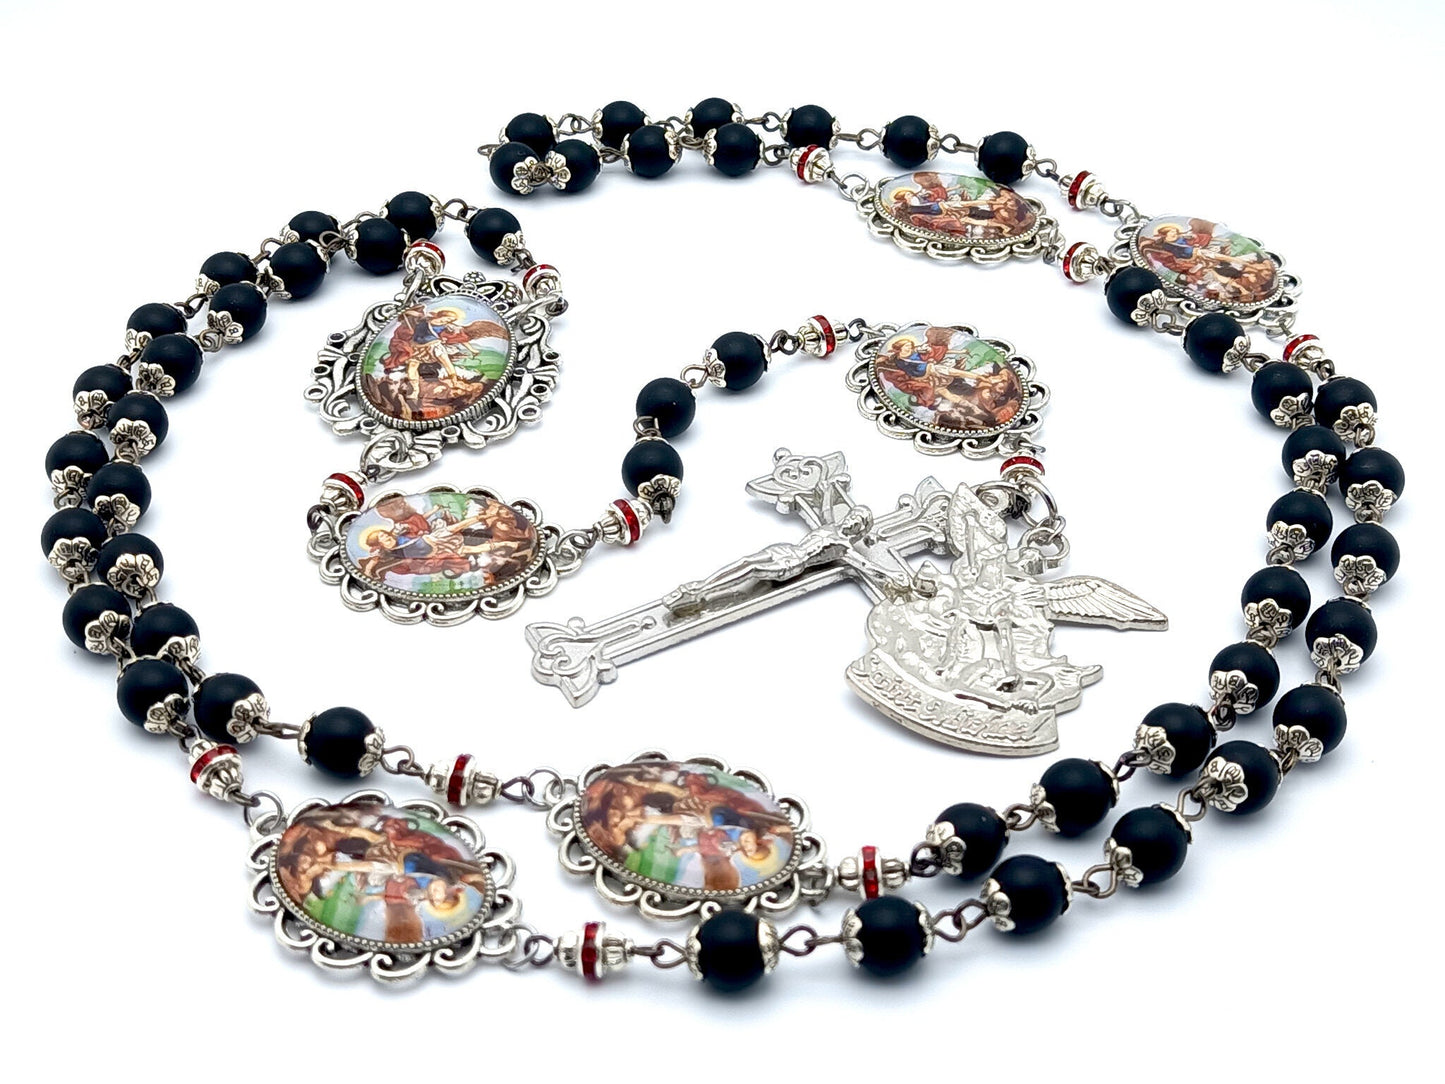 Saint Michael unique rosary beads with matt onyx beads, silver picture pater beads, silver crucifix, medal and picture centre medal.